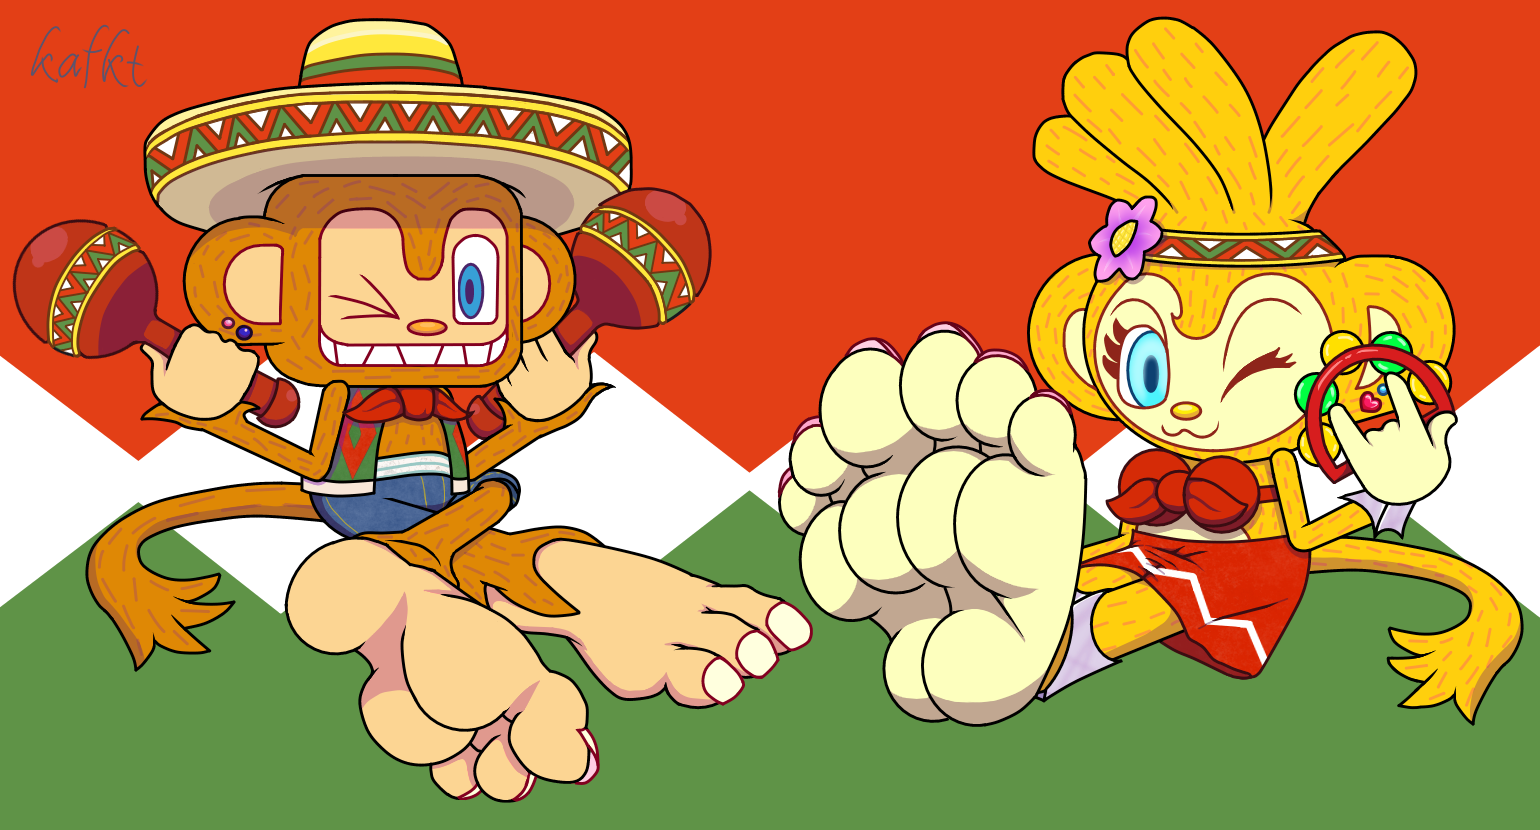 samba de amigo doodle page, featuring characters from both the